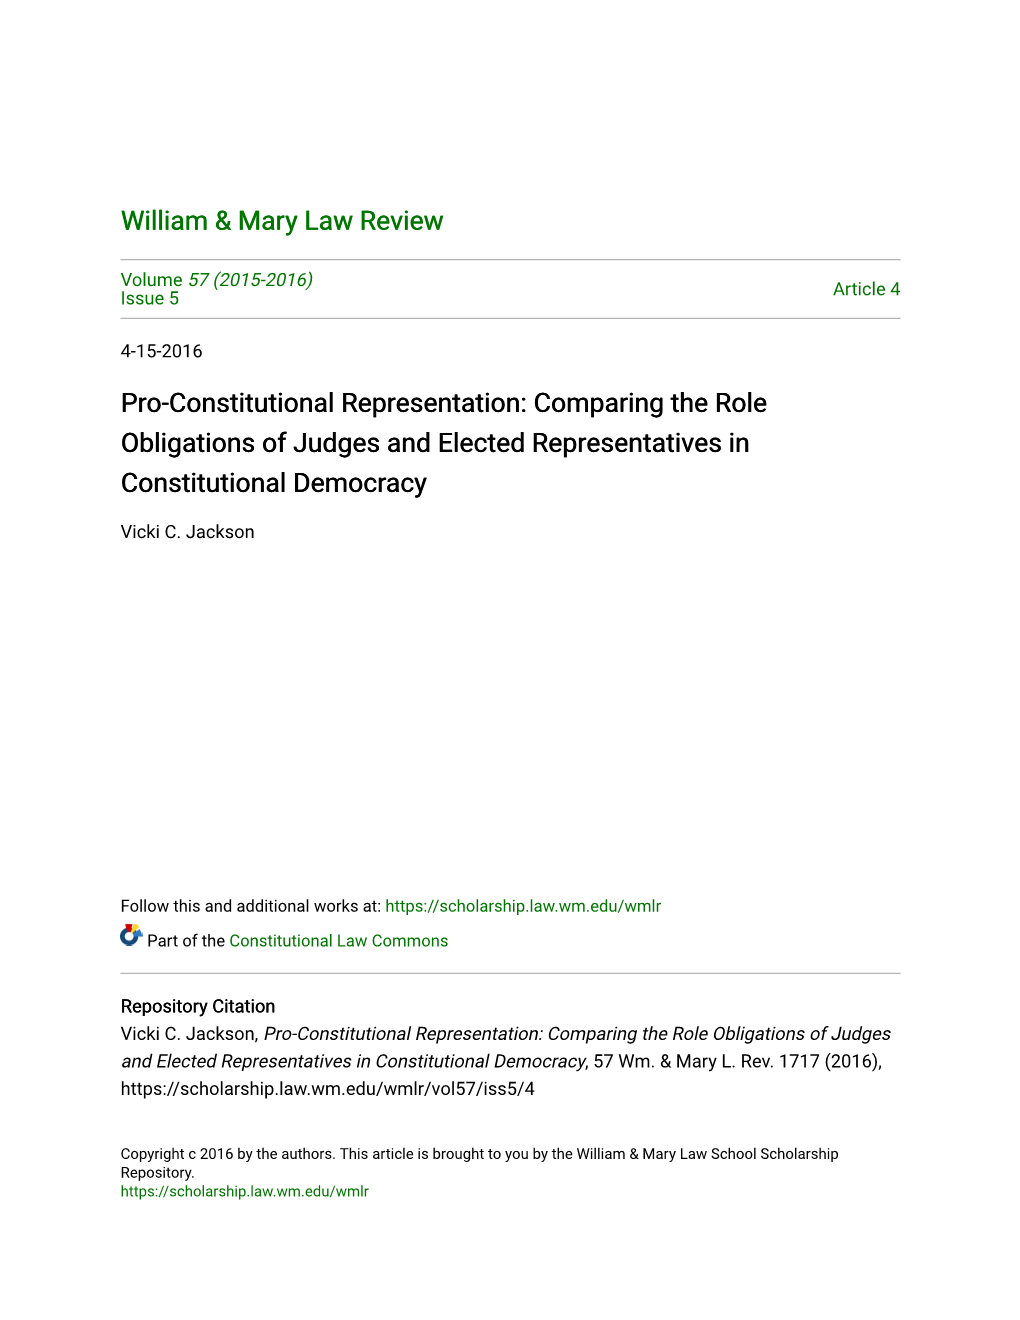 Pro-Constitutional Representation: Comparing the Role Obligations of Judges and Elected Representatives in Constitutional Democracy